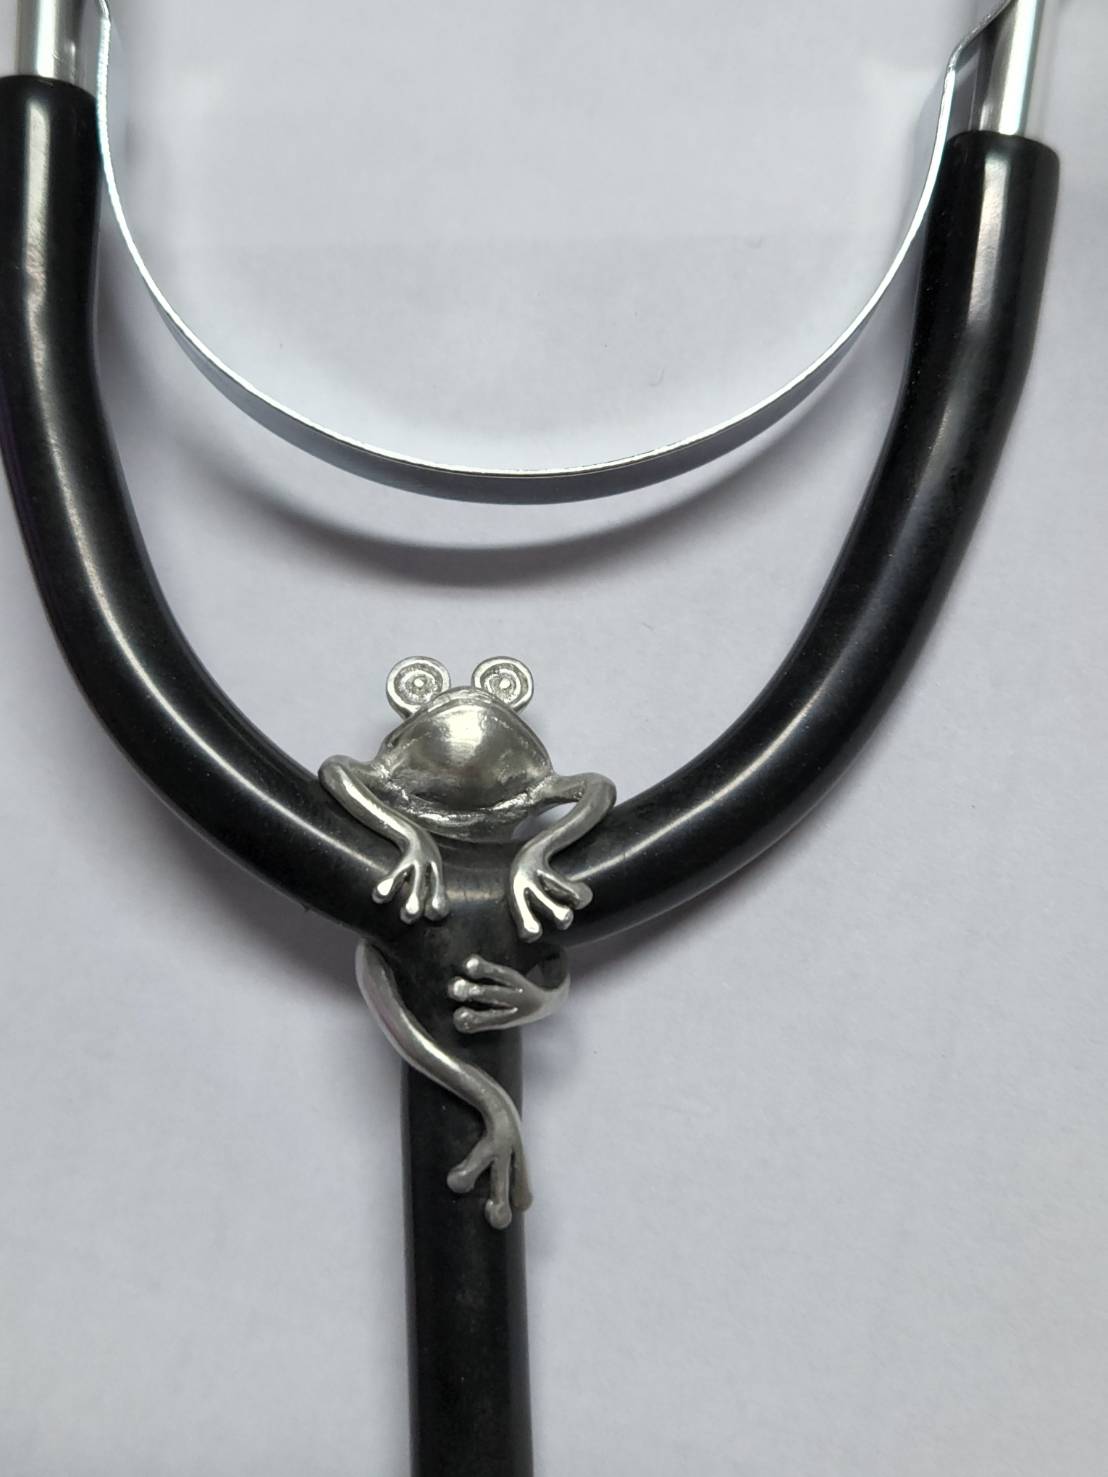 Quinnlyn & Co. Frog Stethoscope Charm, Gifts for Women, RN Nurses with Inspirational Quote on Greeting Card